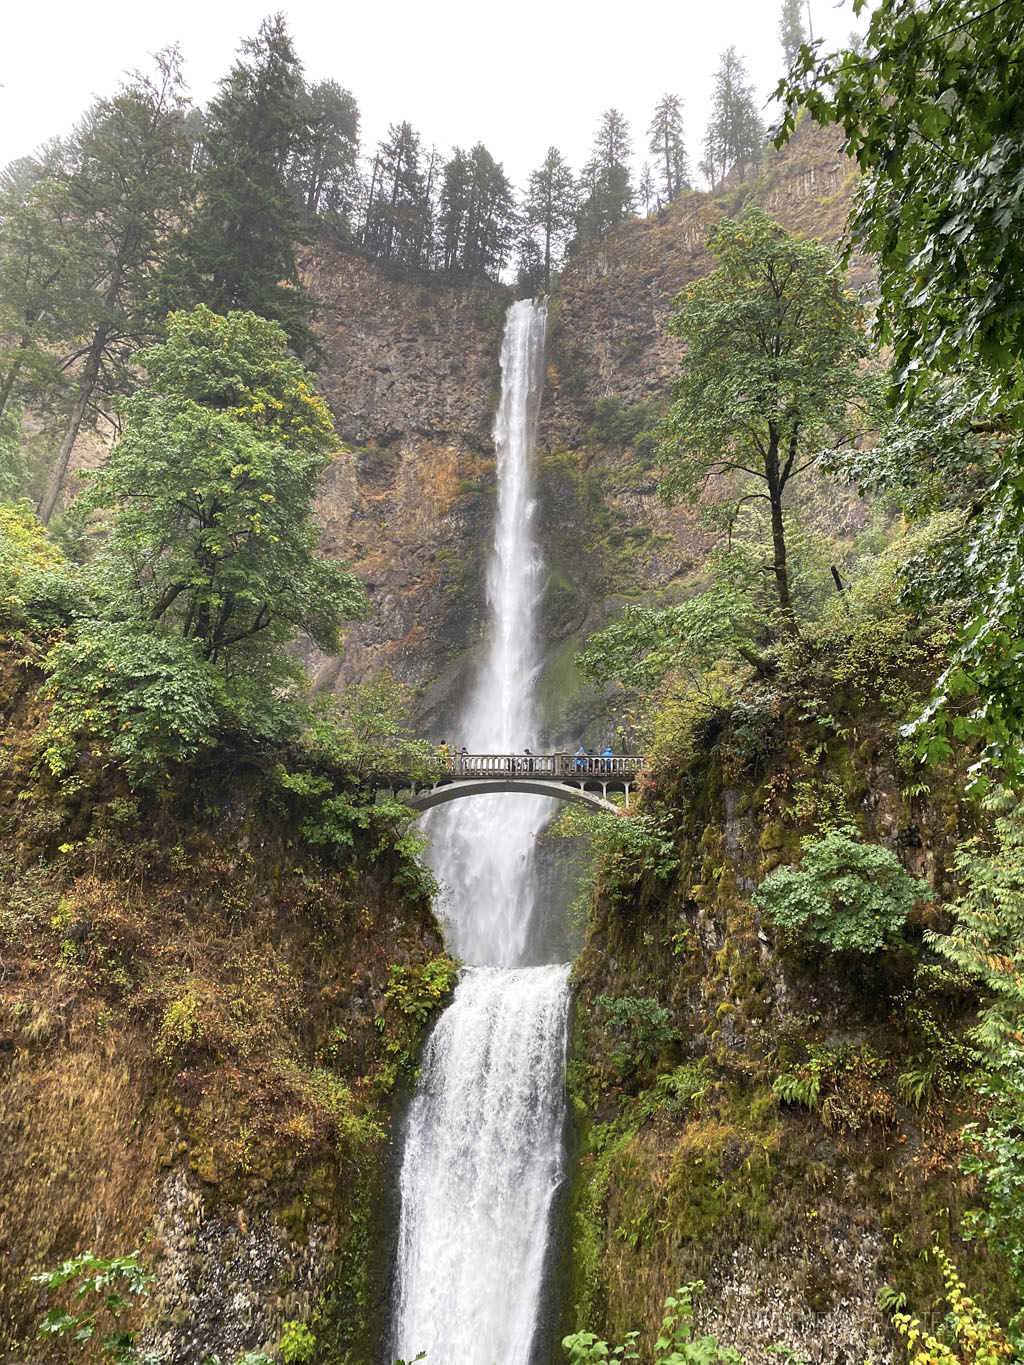 Multonomah Falls, a must see during a Columbia River Gorge itinerary